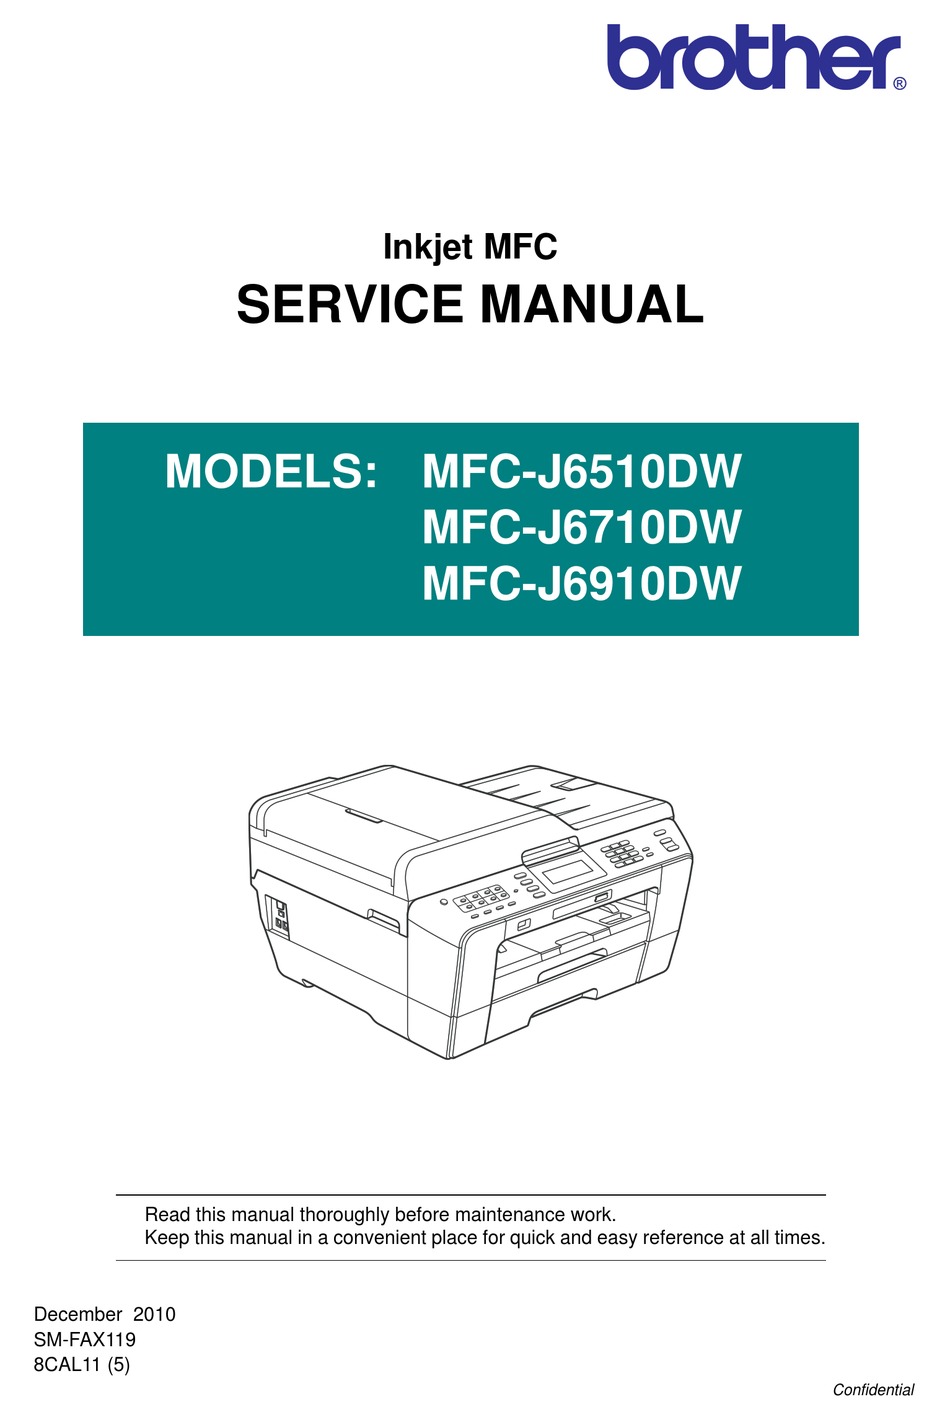 Firmware Switch Setting And Printout Codes 10 And (User-Accessible) - Brother MFC-J6510DW Service Manual [Page 318] | ManualsLib